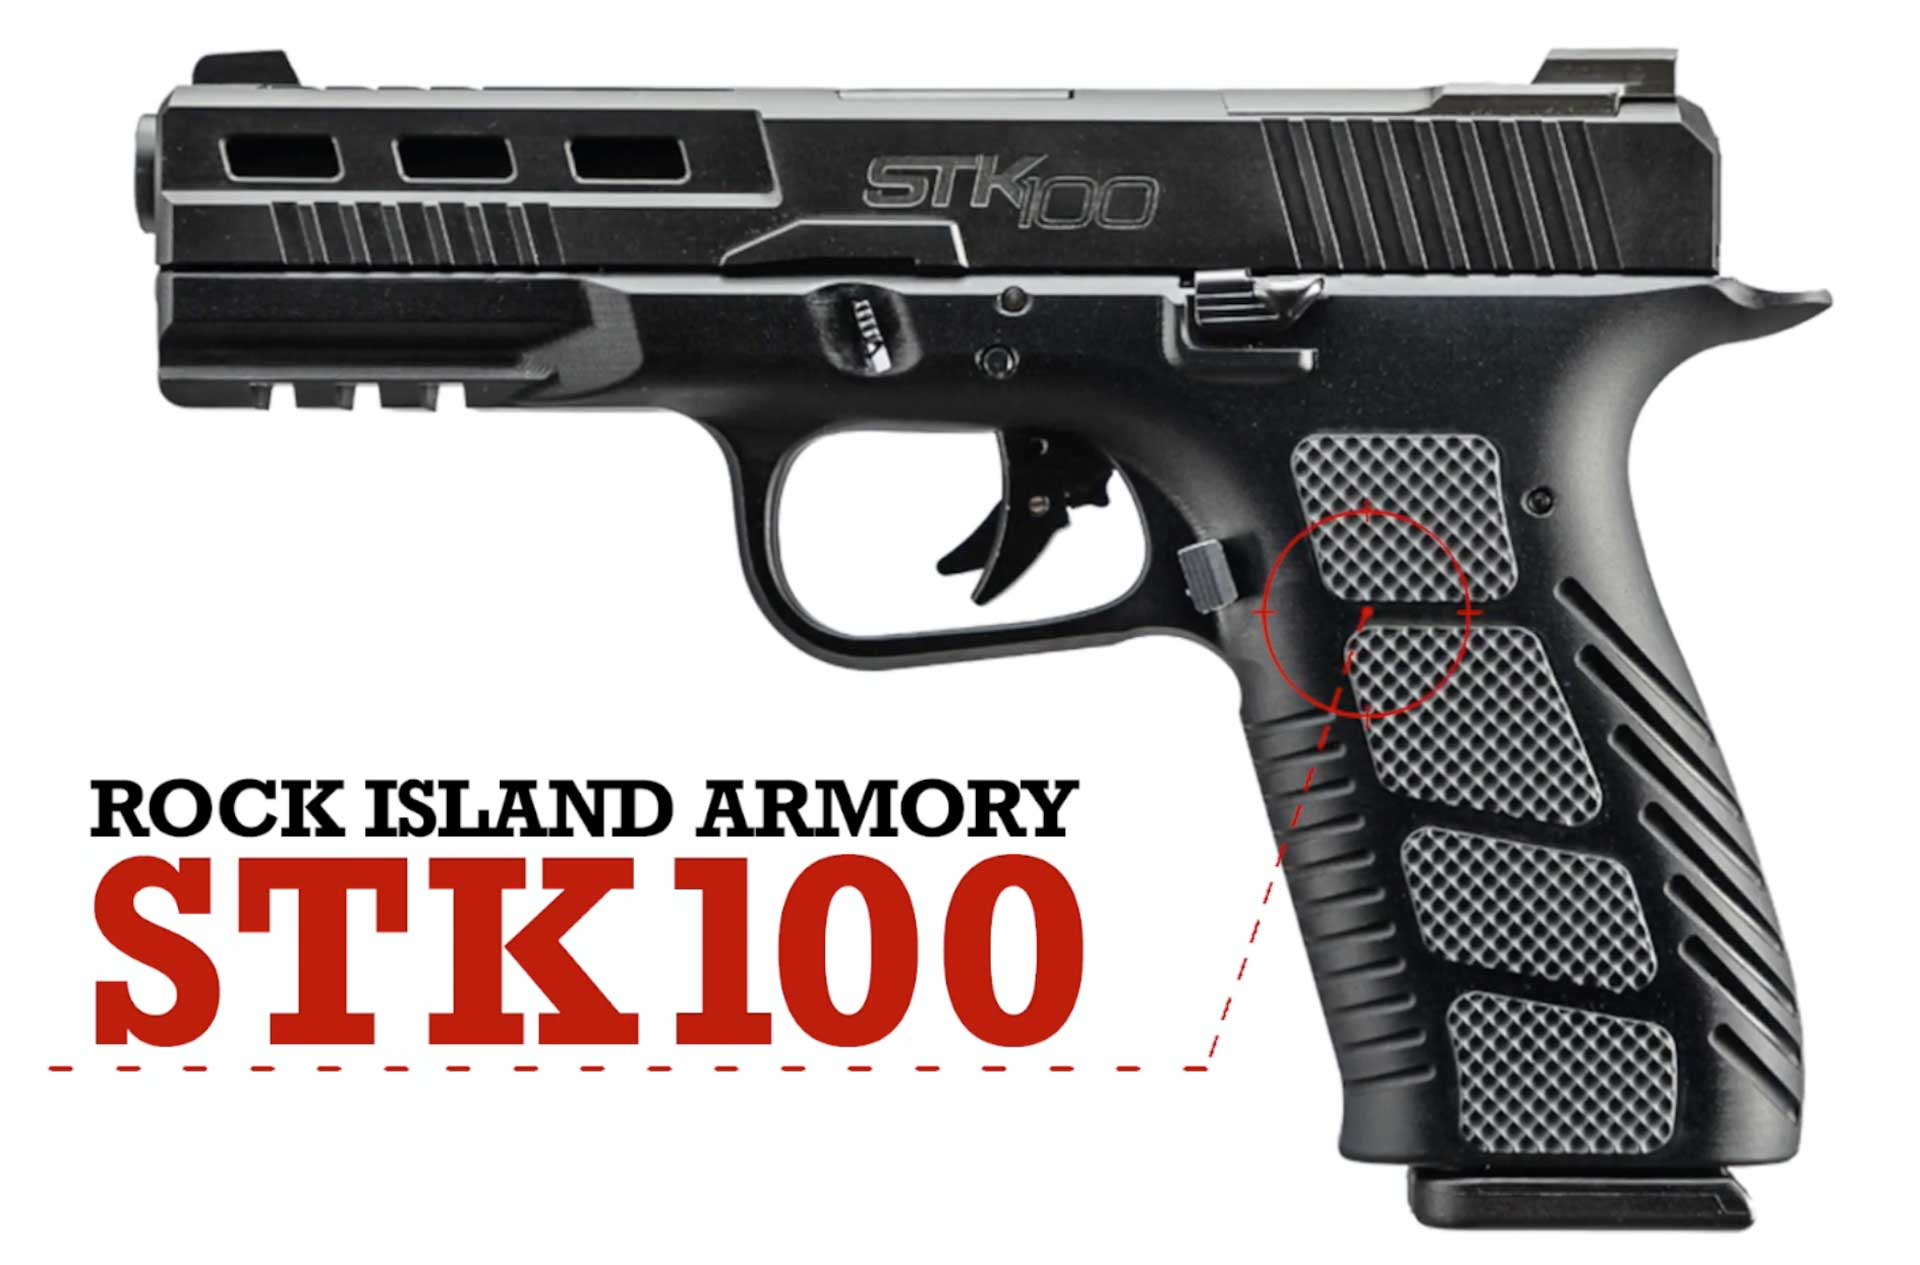 left side black pistol on white background with text on image noting "ROCK ISLAND ARMORY STK100"